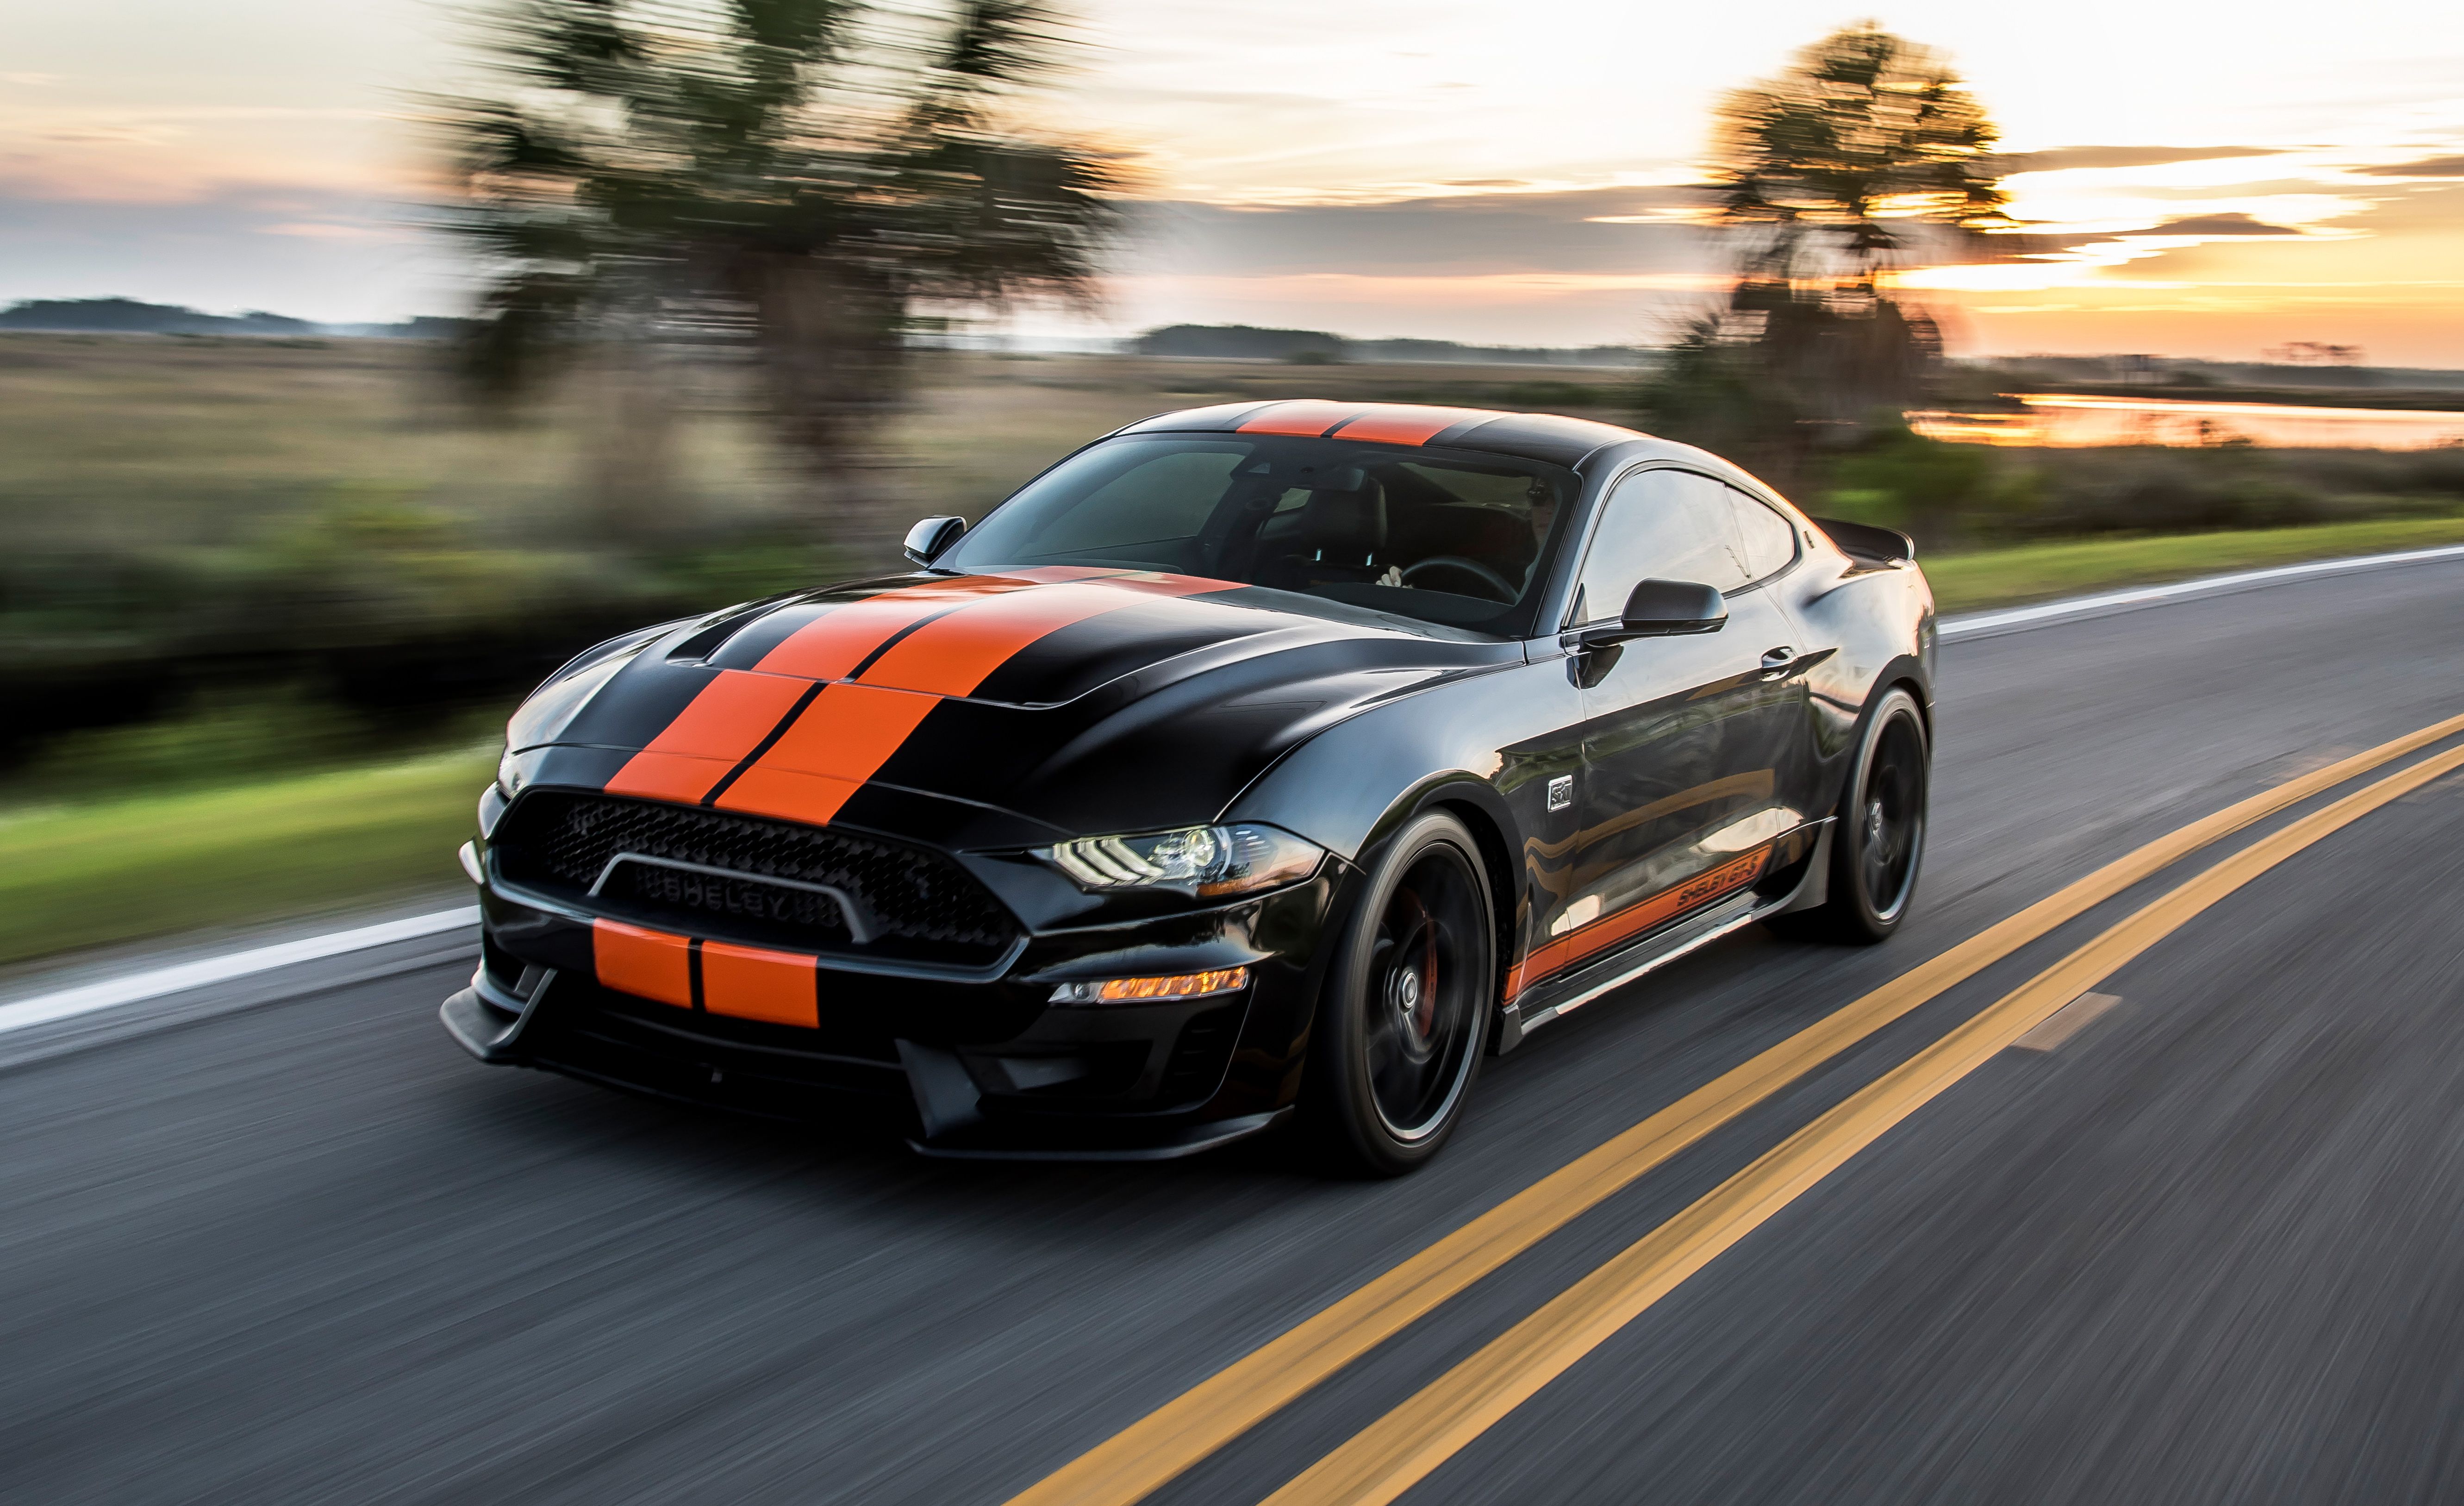 2019 Ford Mustang Shelby Gt S Is A Rental Car We Can Dig